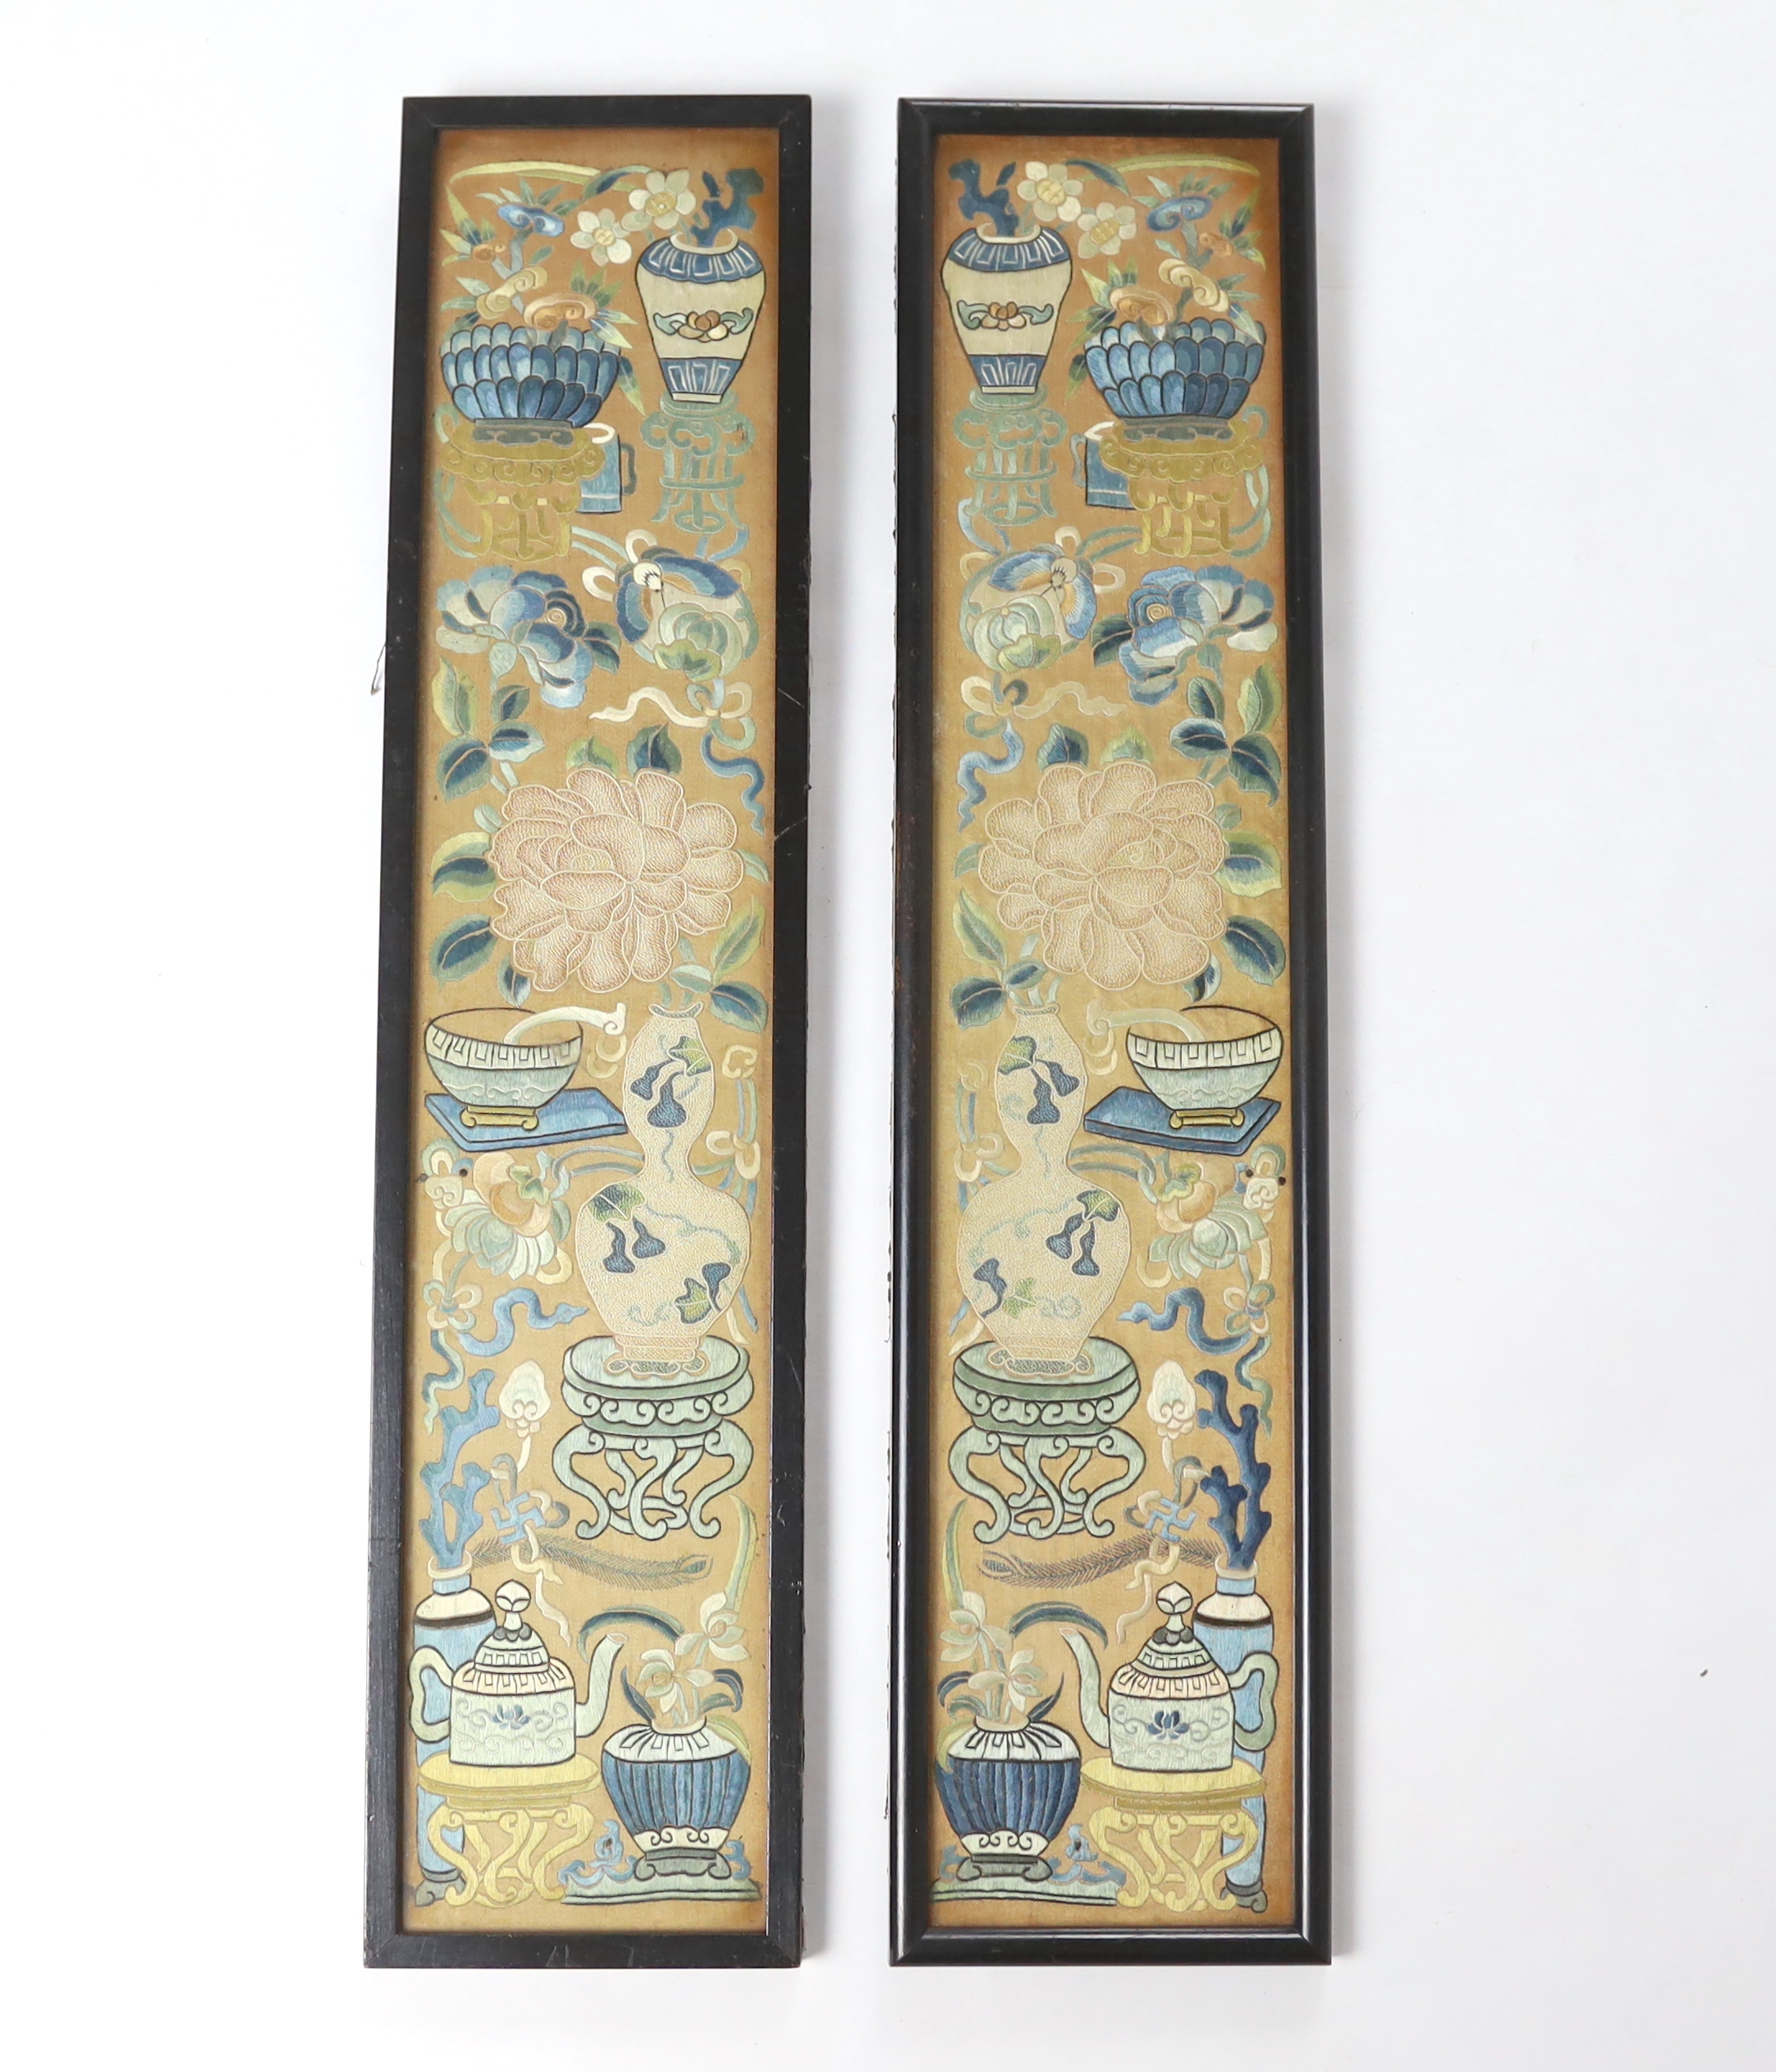 A pair of late 19th century / early 20th century Chinese silk embroidered sleeve bands, embroidered mostly with Chinese knot and stem stitch with unusual auspicious symbols each, 9.5cm wide x 49.5cm high (framed separate